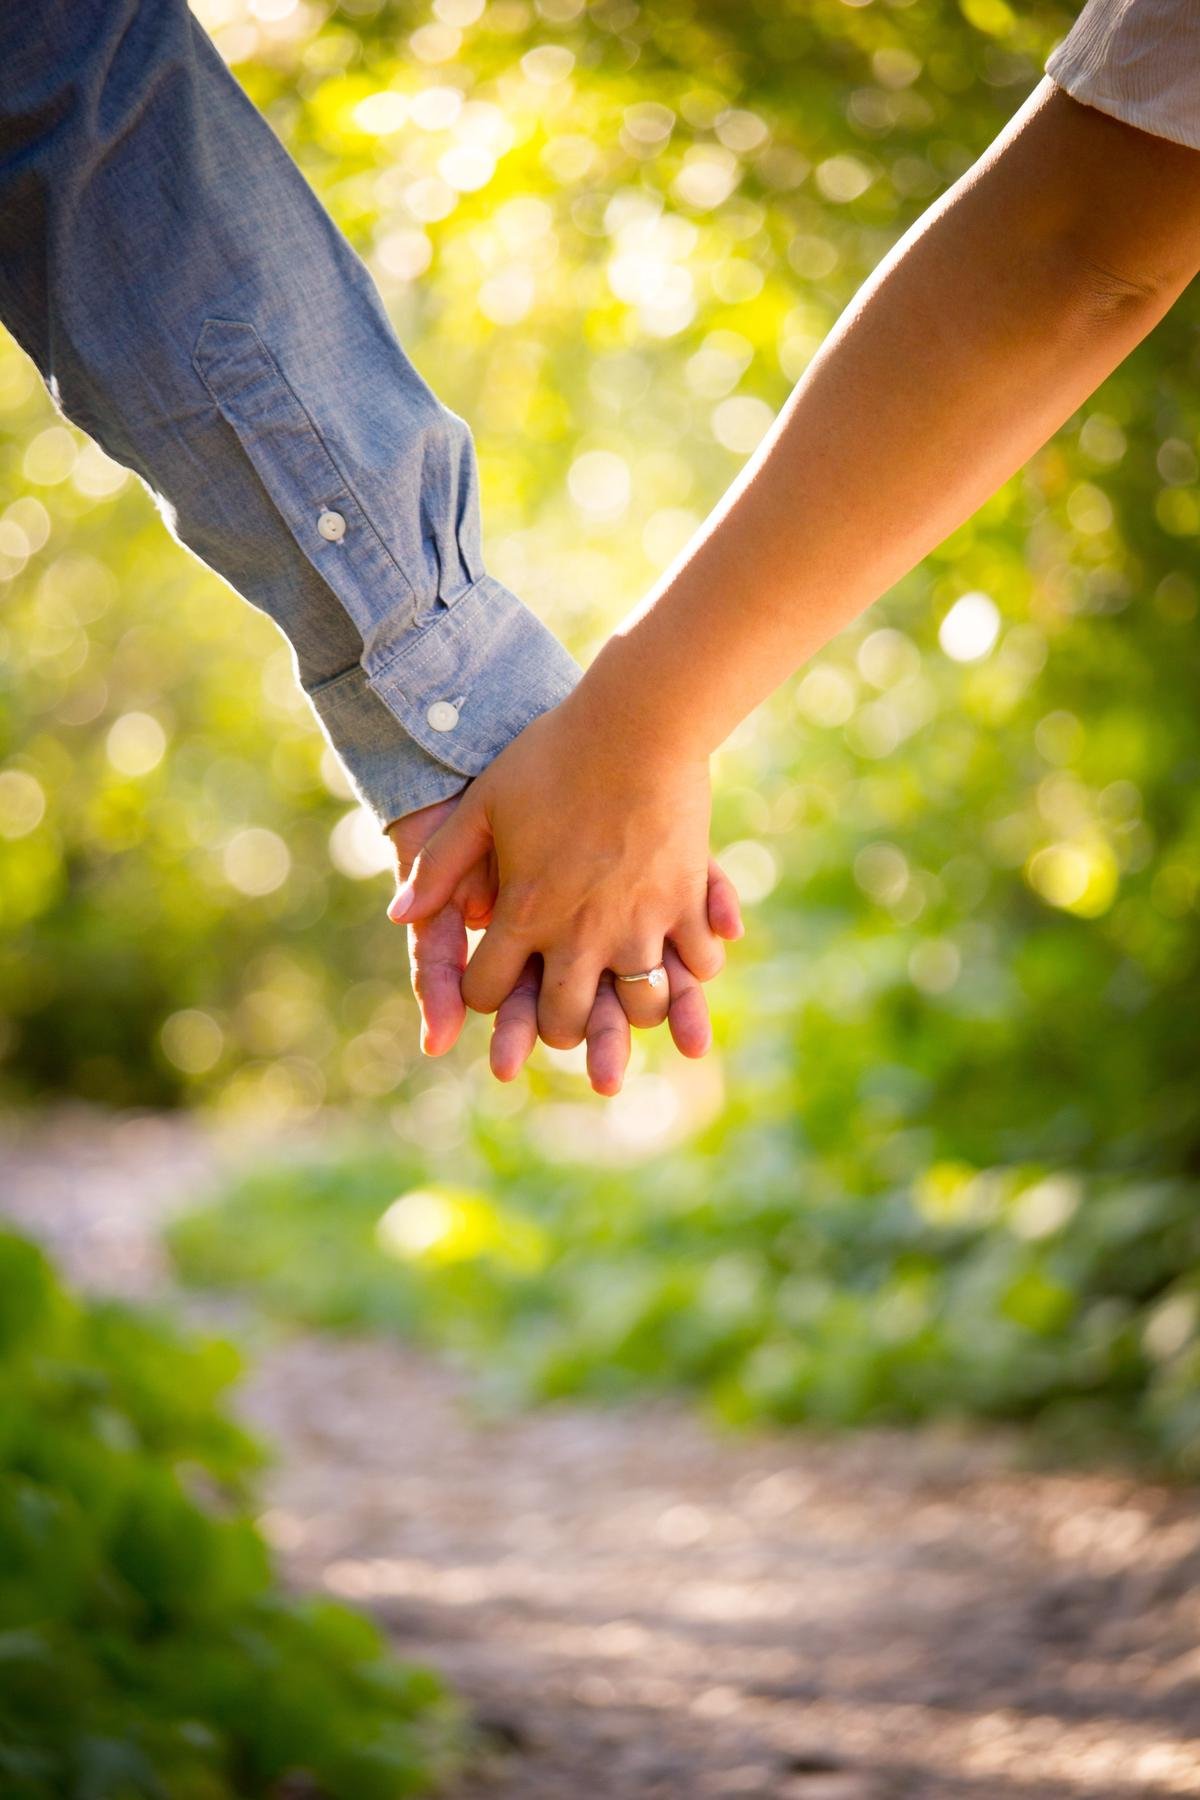 Image of a person holding hands with a child with Autism, symbolizing the love and support in the caregiver's journey